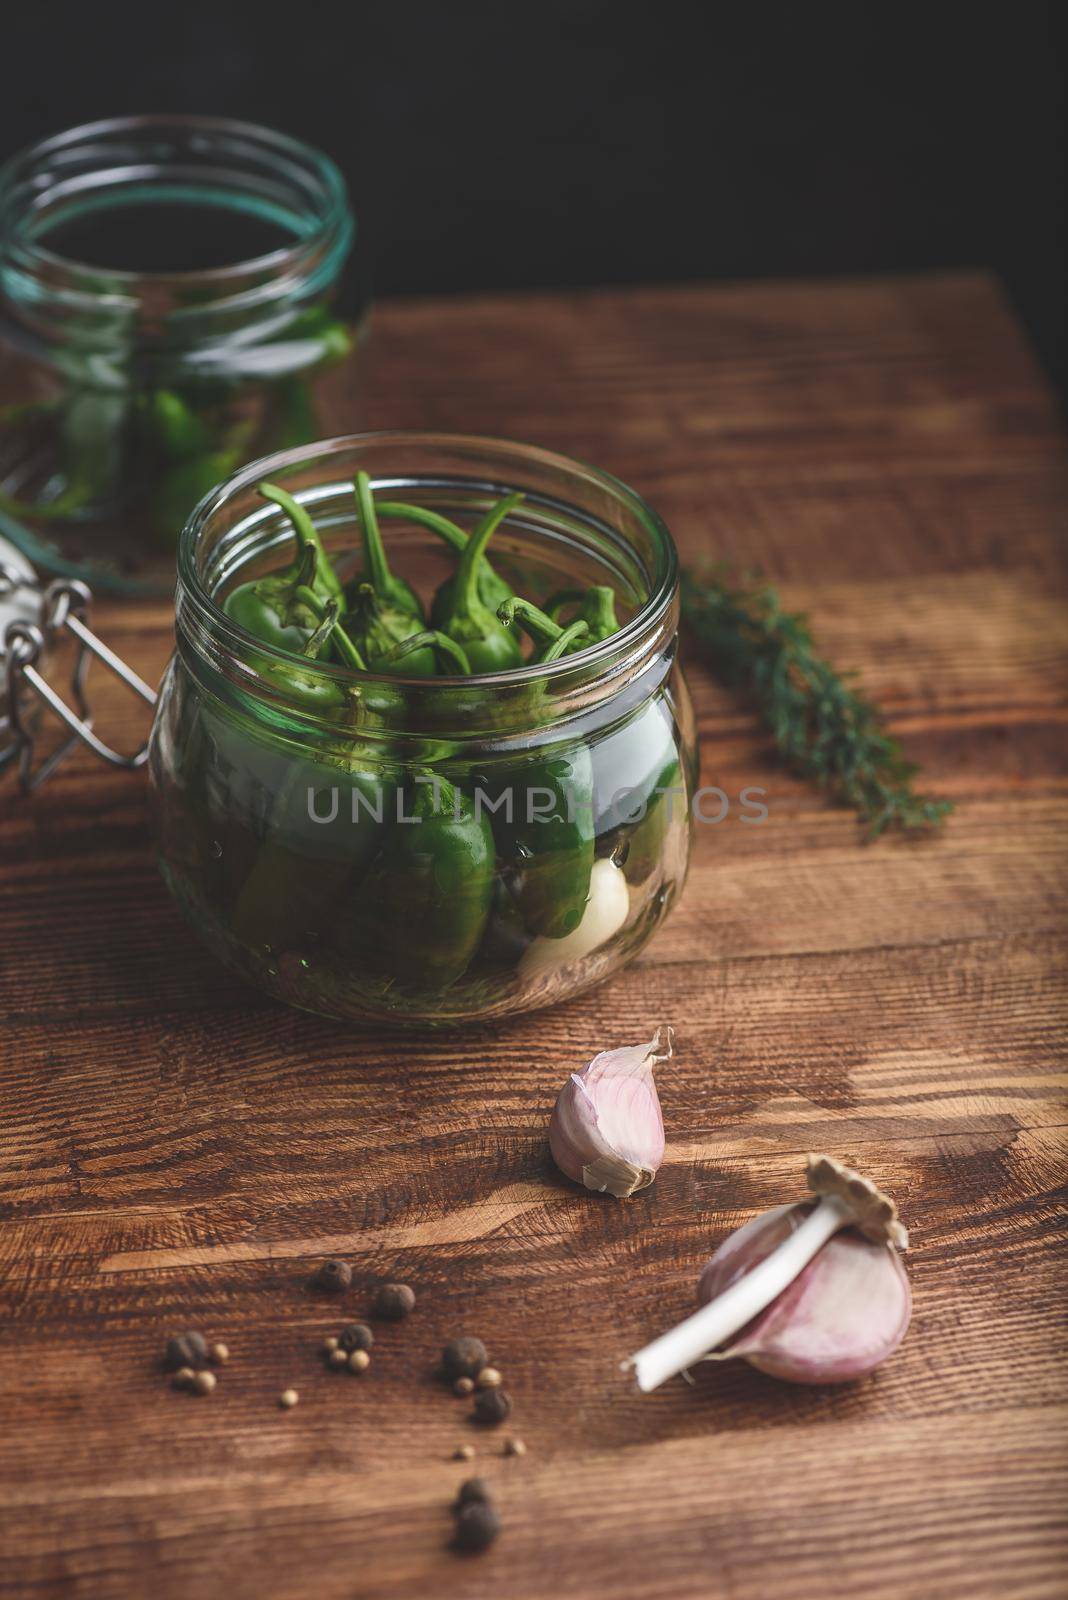 Fresh Jalapeno Peppers in a Glass Jar for Pickling by Seva_blsv